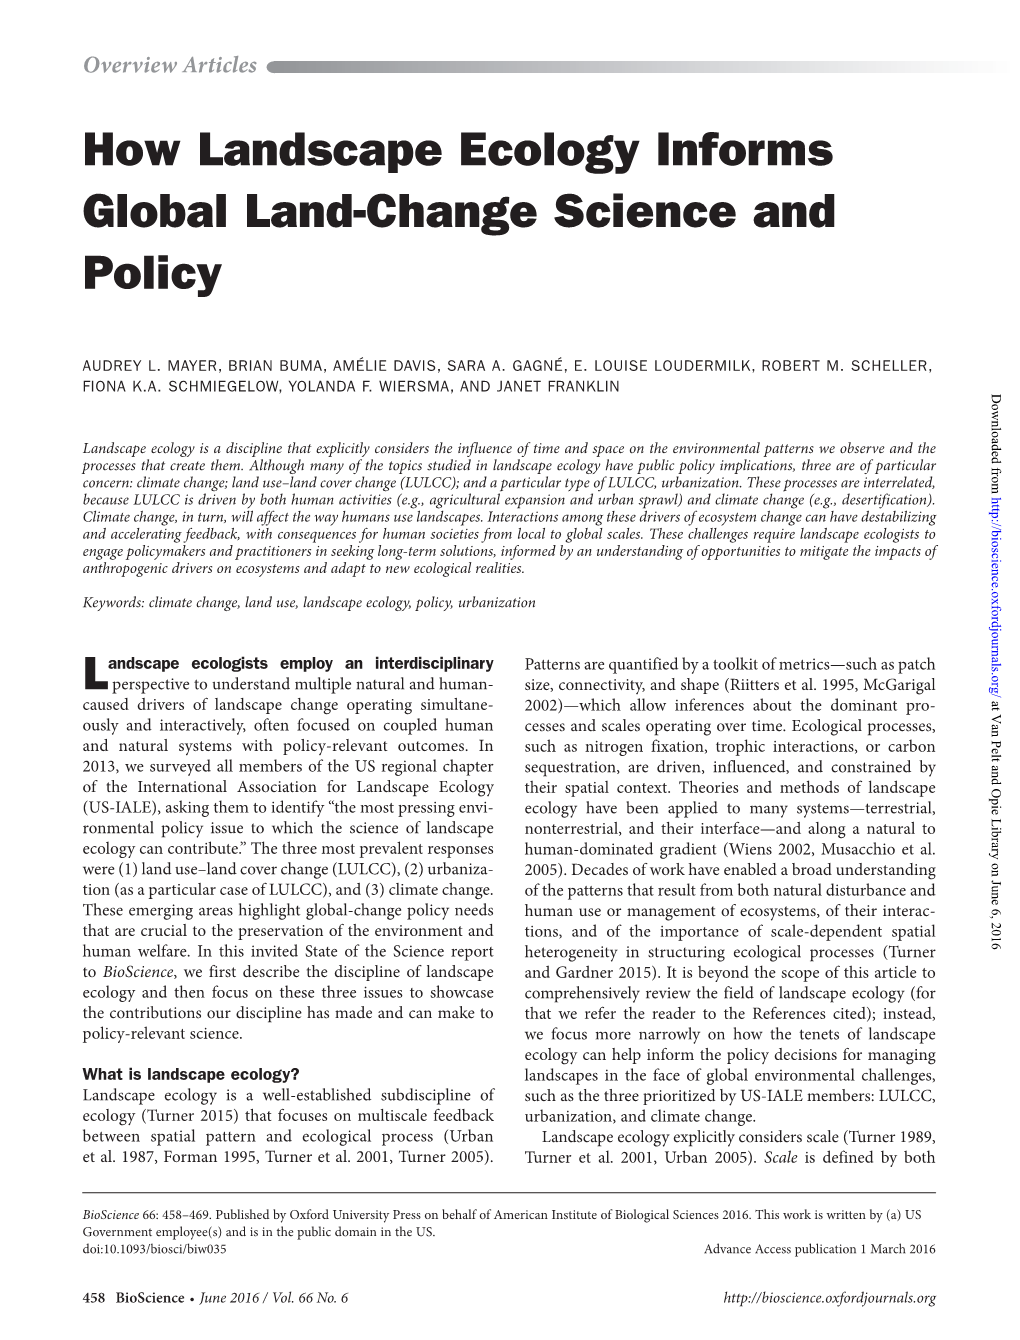 How Landscape Ecology Informs Global Land-Change Science and Policy